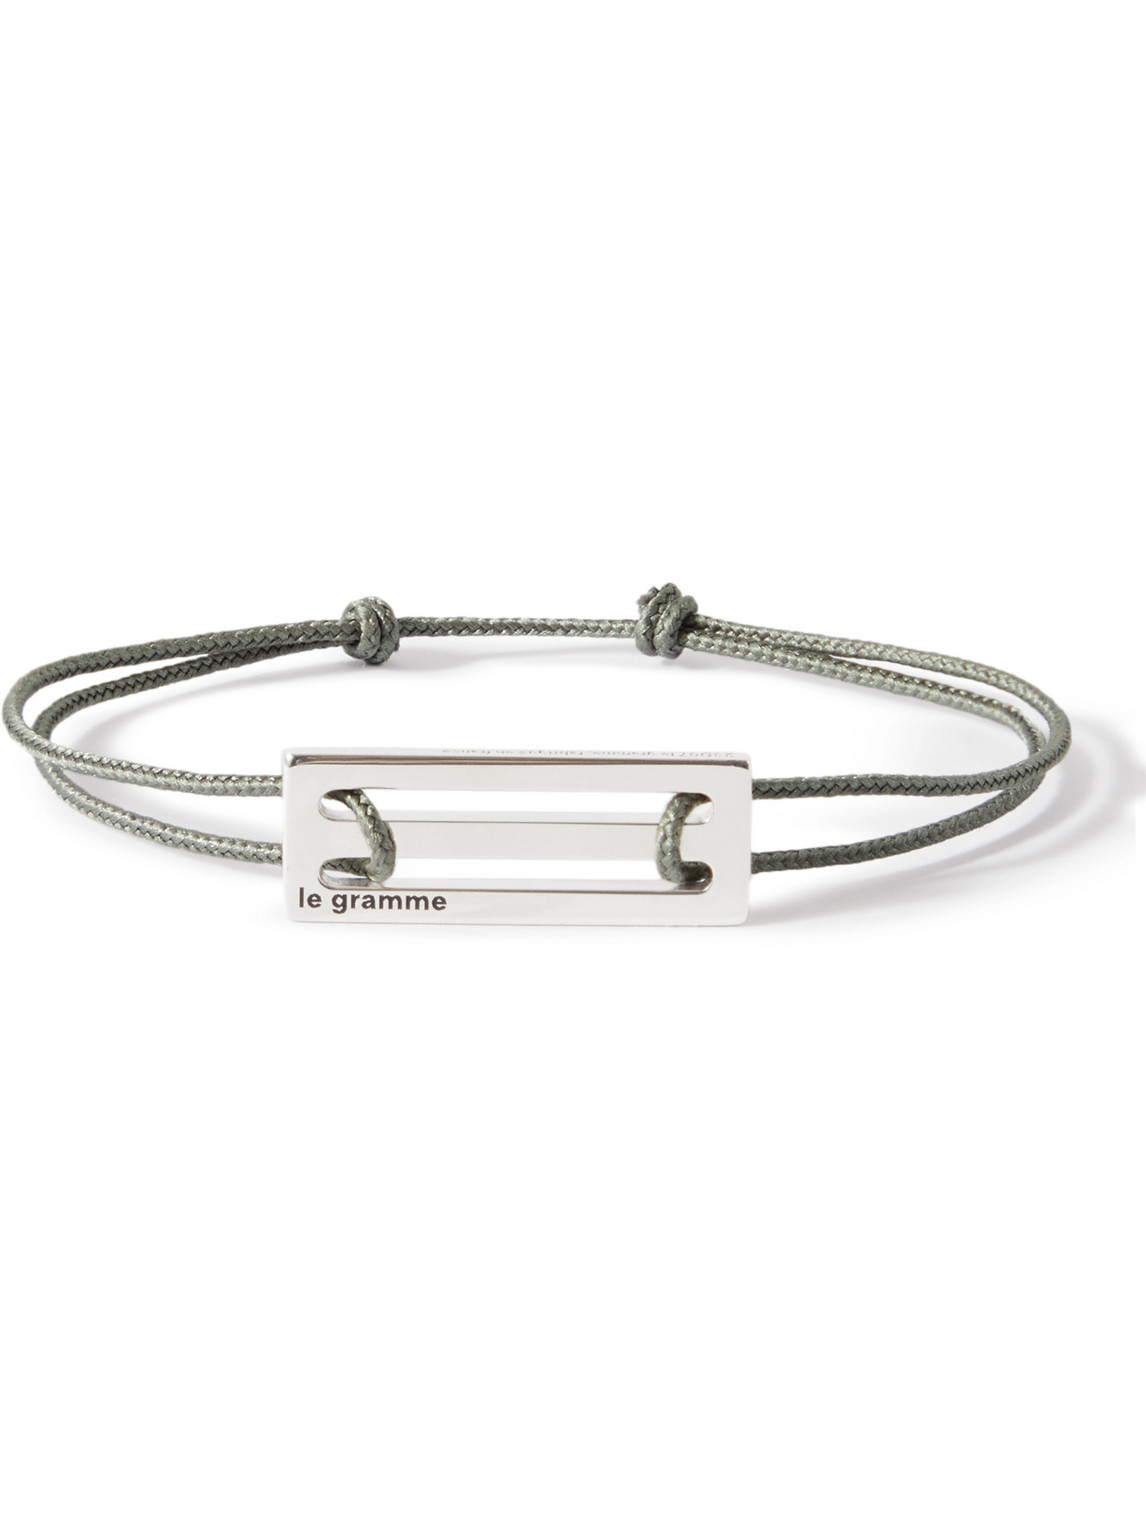 Le Gramme 2.5g Cord And Sterling Silver Bracelet